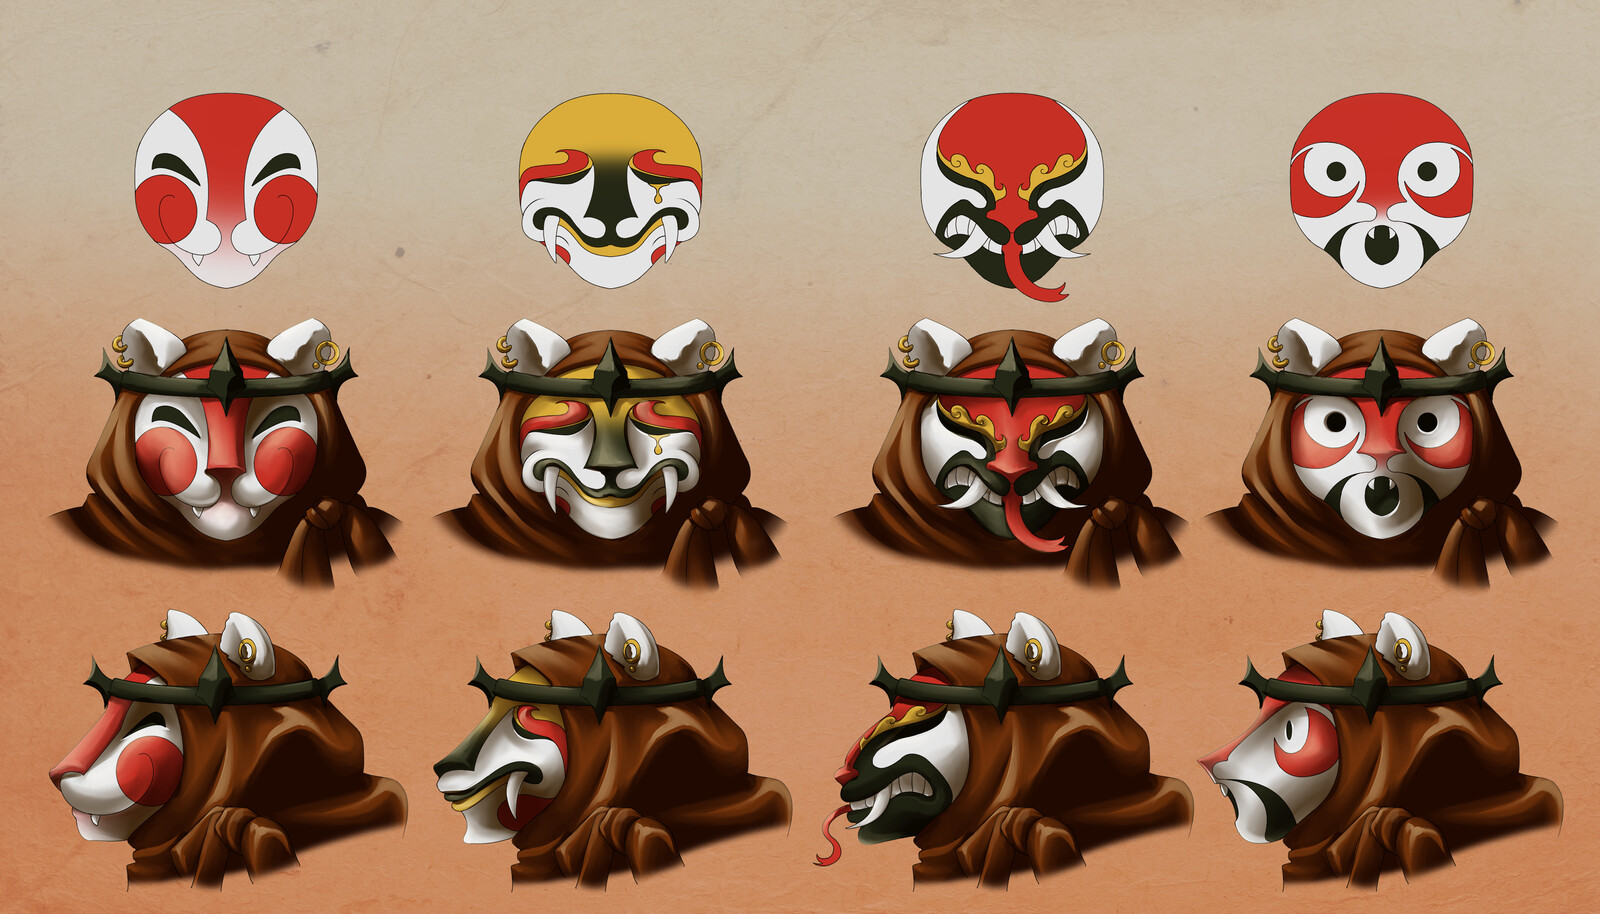 The character wears many masks that he uses for different expressions.